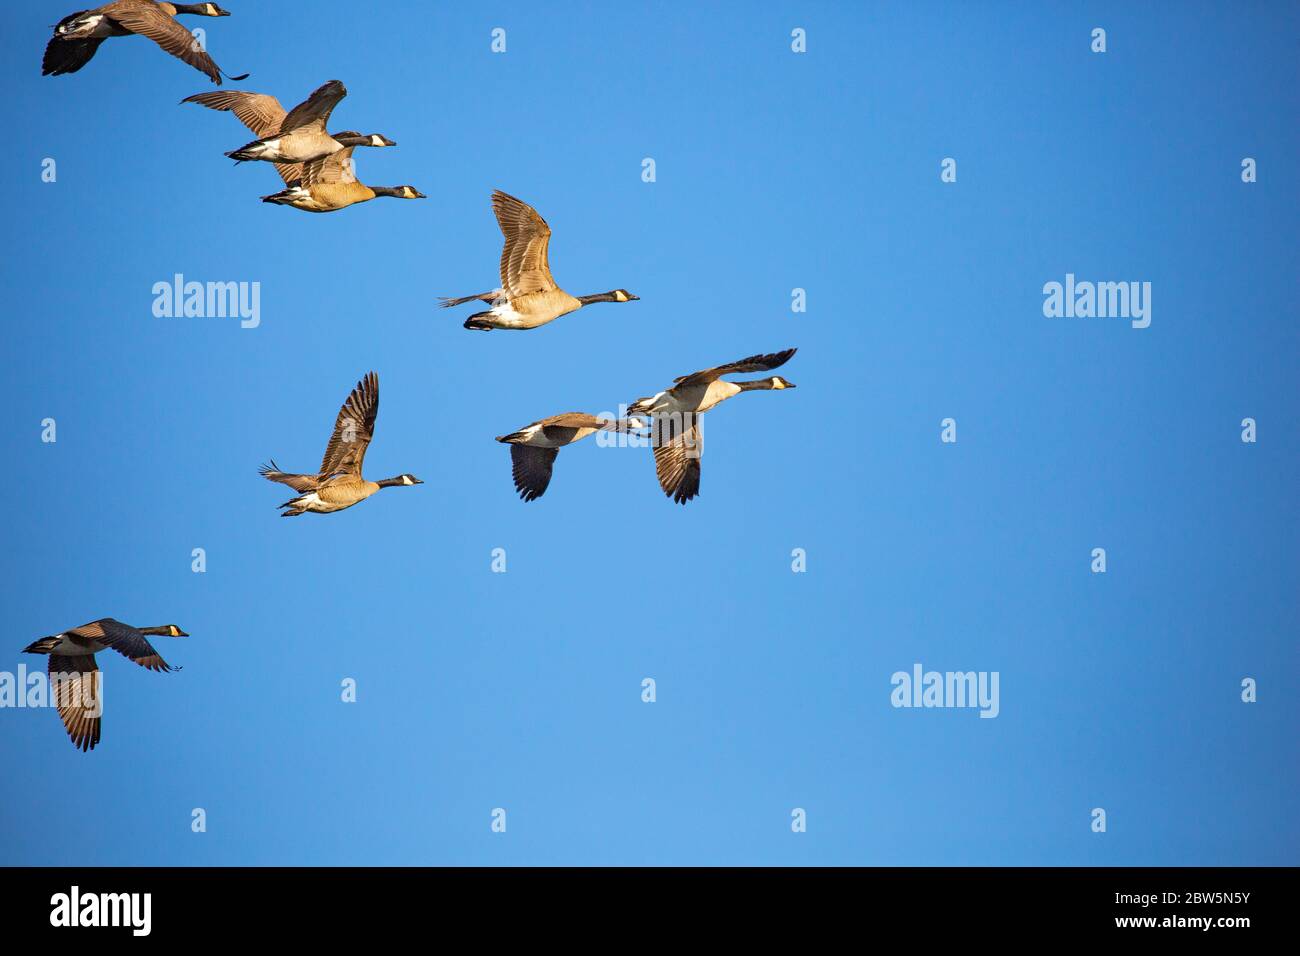 Adult canada geese (Branta canadensis) flying in a V formation in a blue sky, Wausau, Wisconsin, horizontal Stock Photo